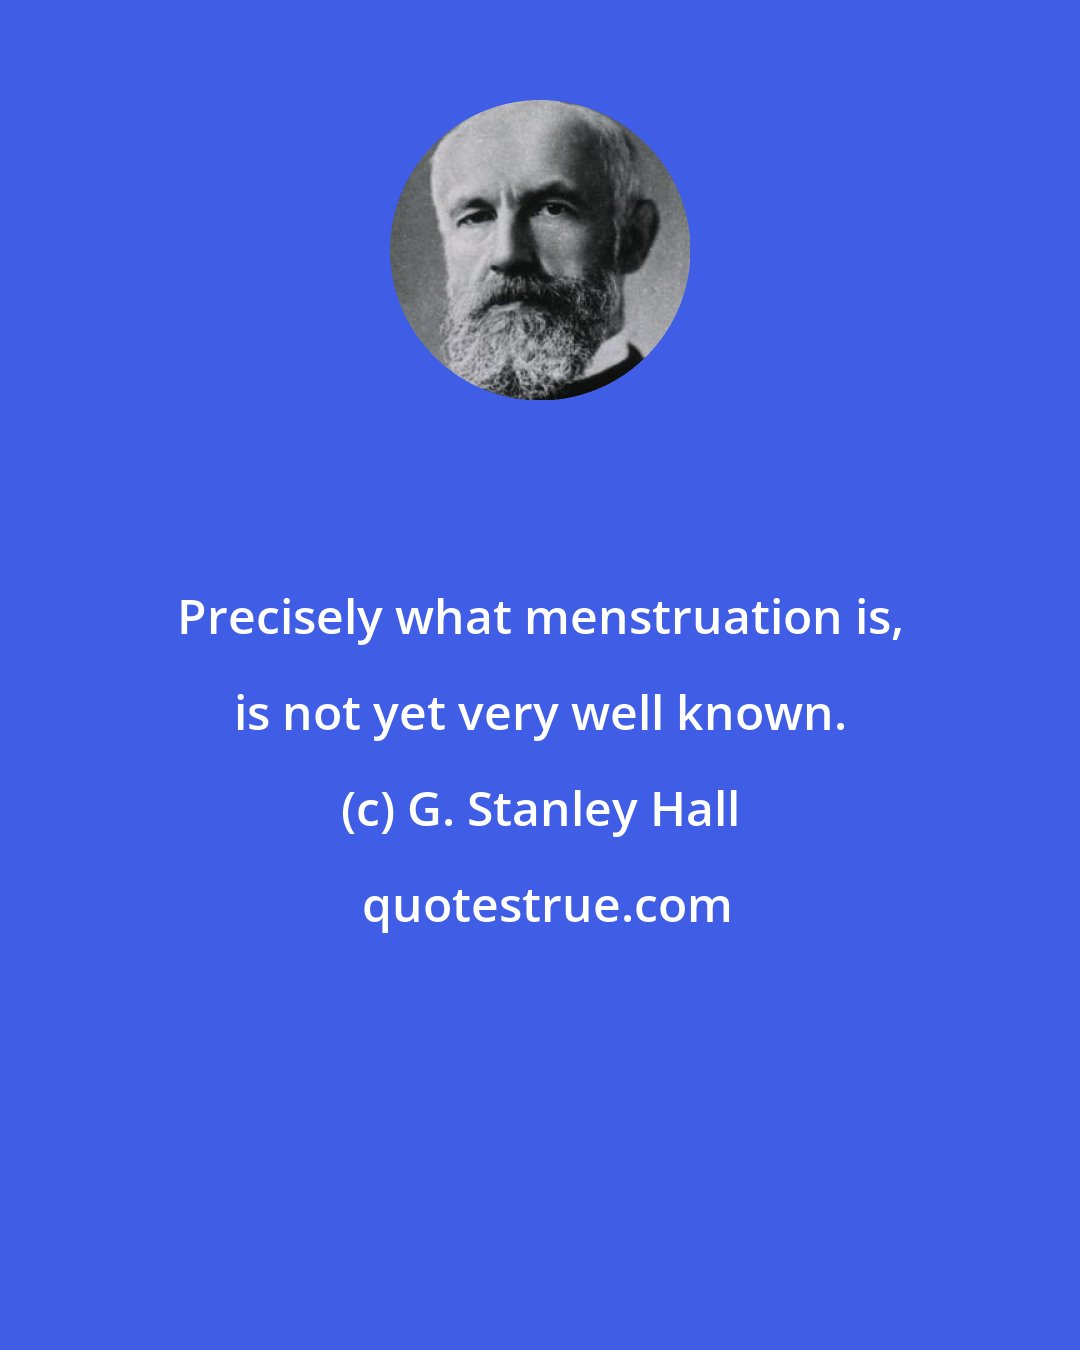 G. Stanley Hall: Precisely what menstruation is, is not yet very well known.